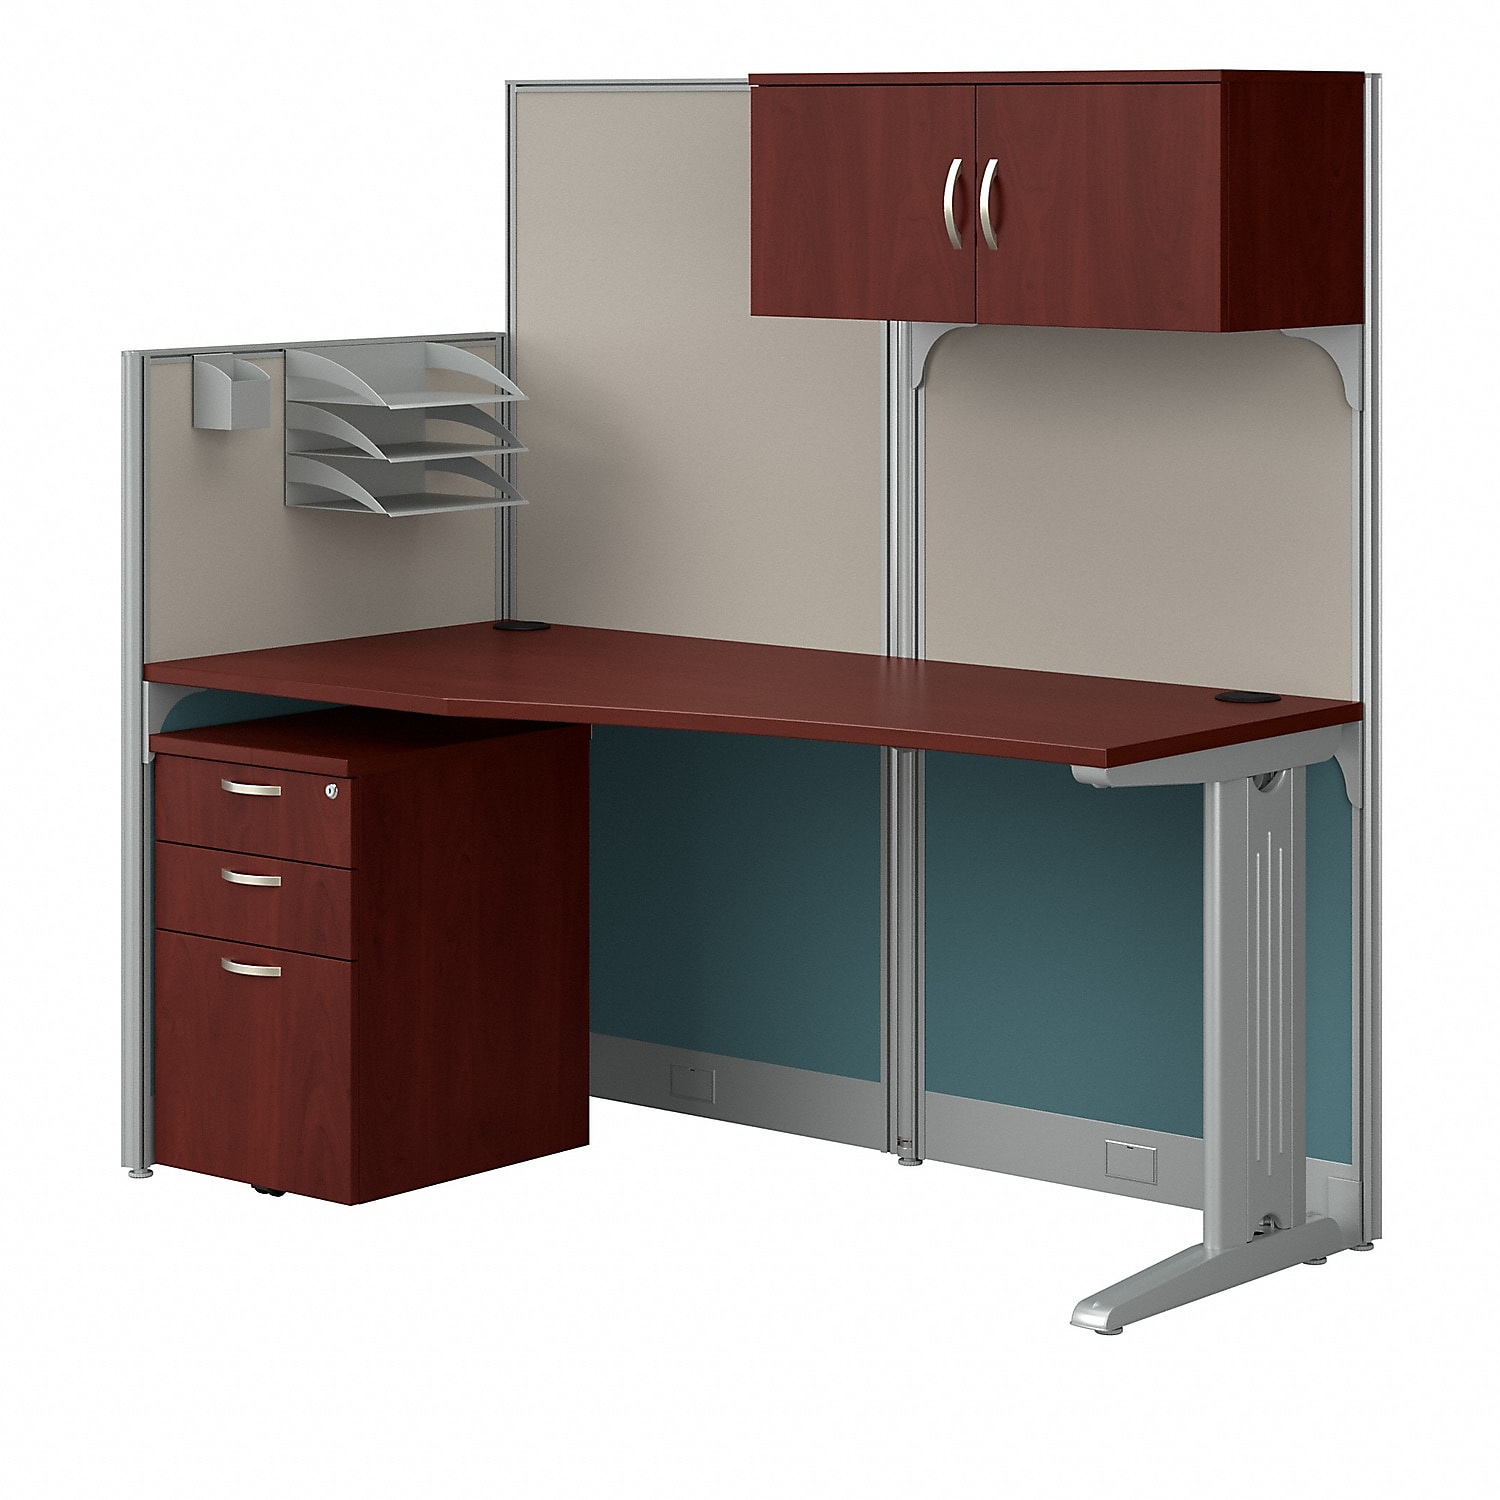 Office in an Hour Cubicle Desk with Storage in Hansen Cherry - Engineered Wood - image 1 of 9